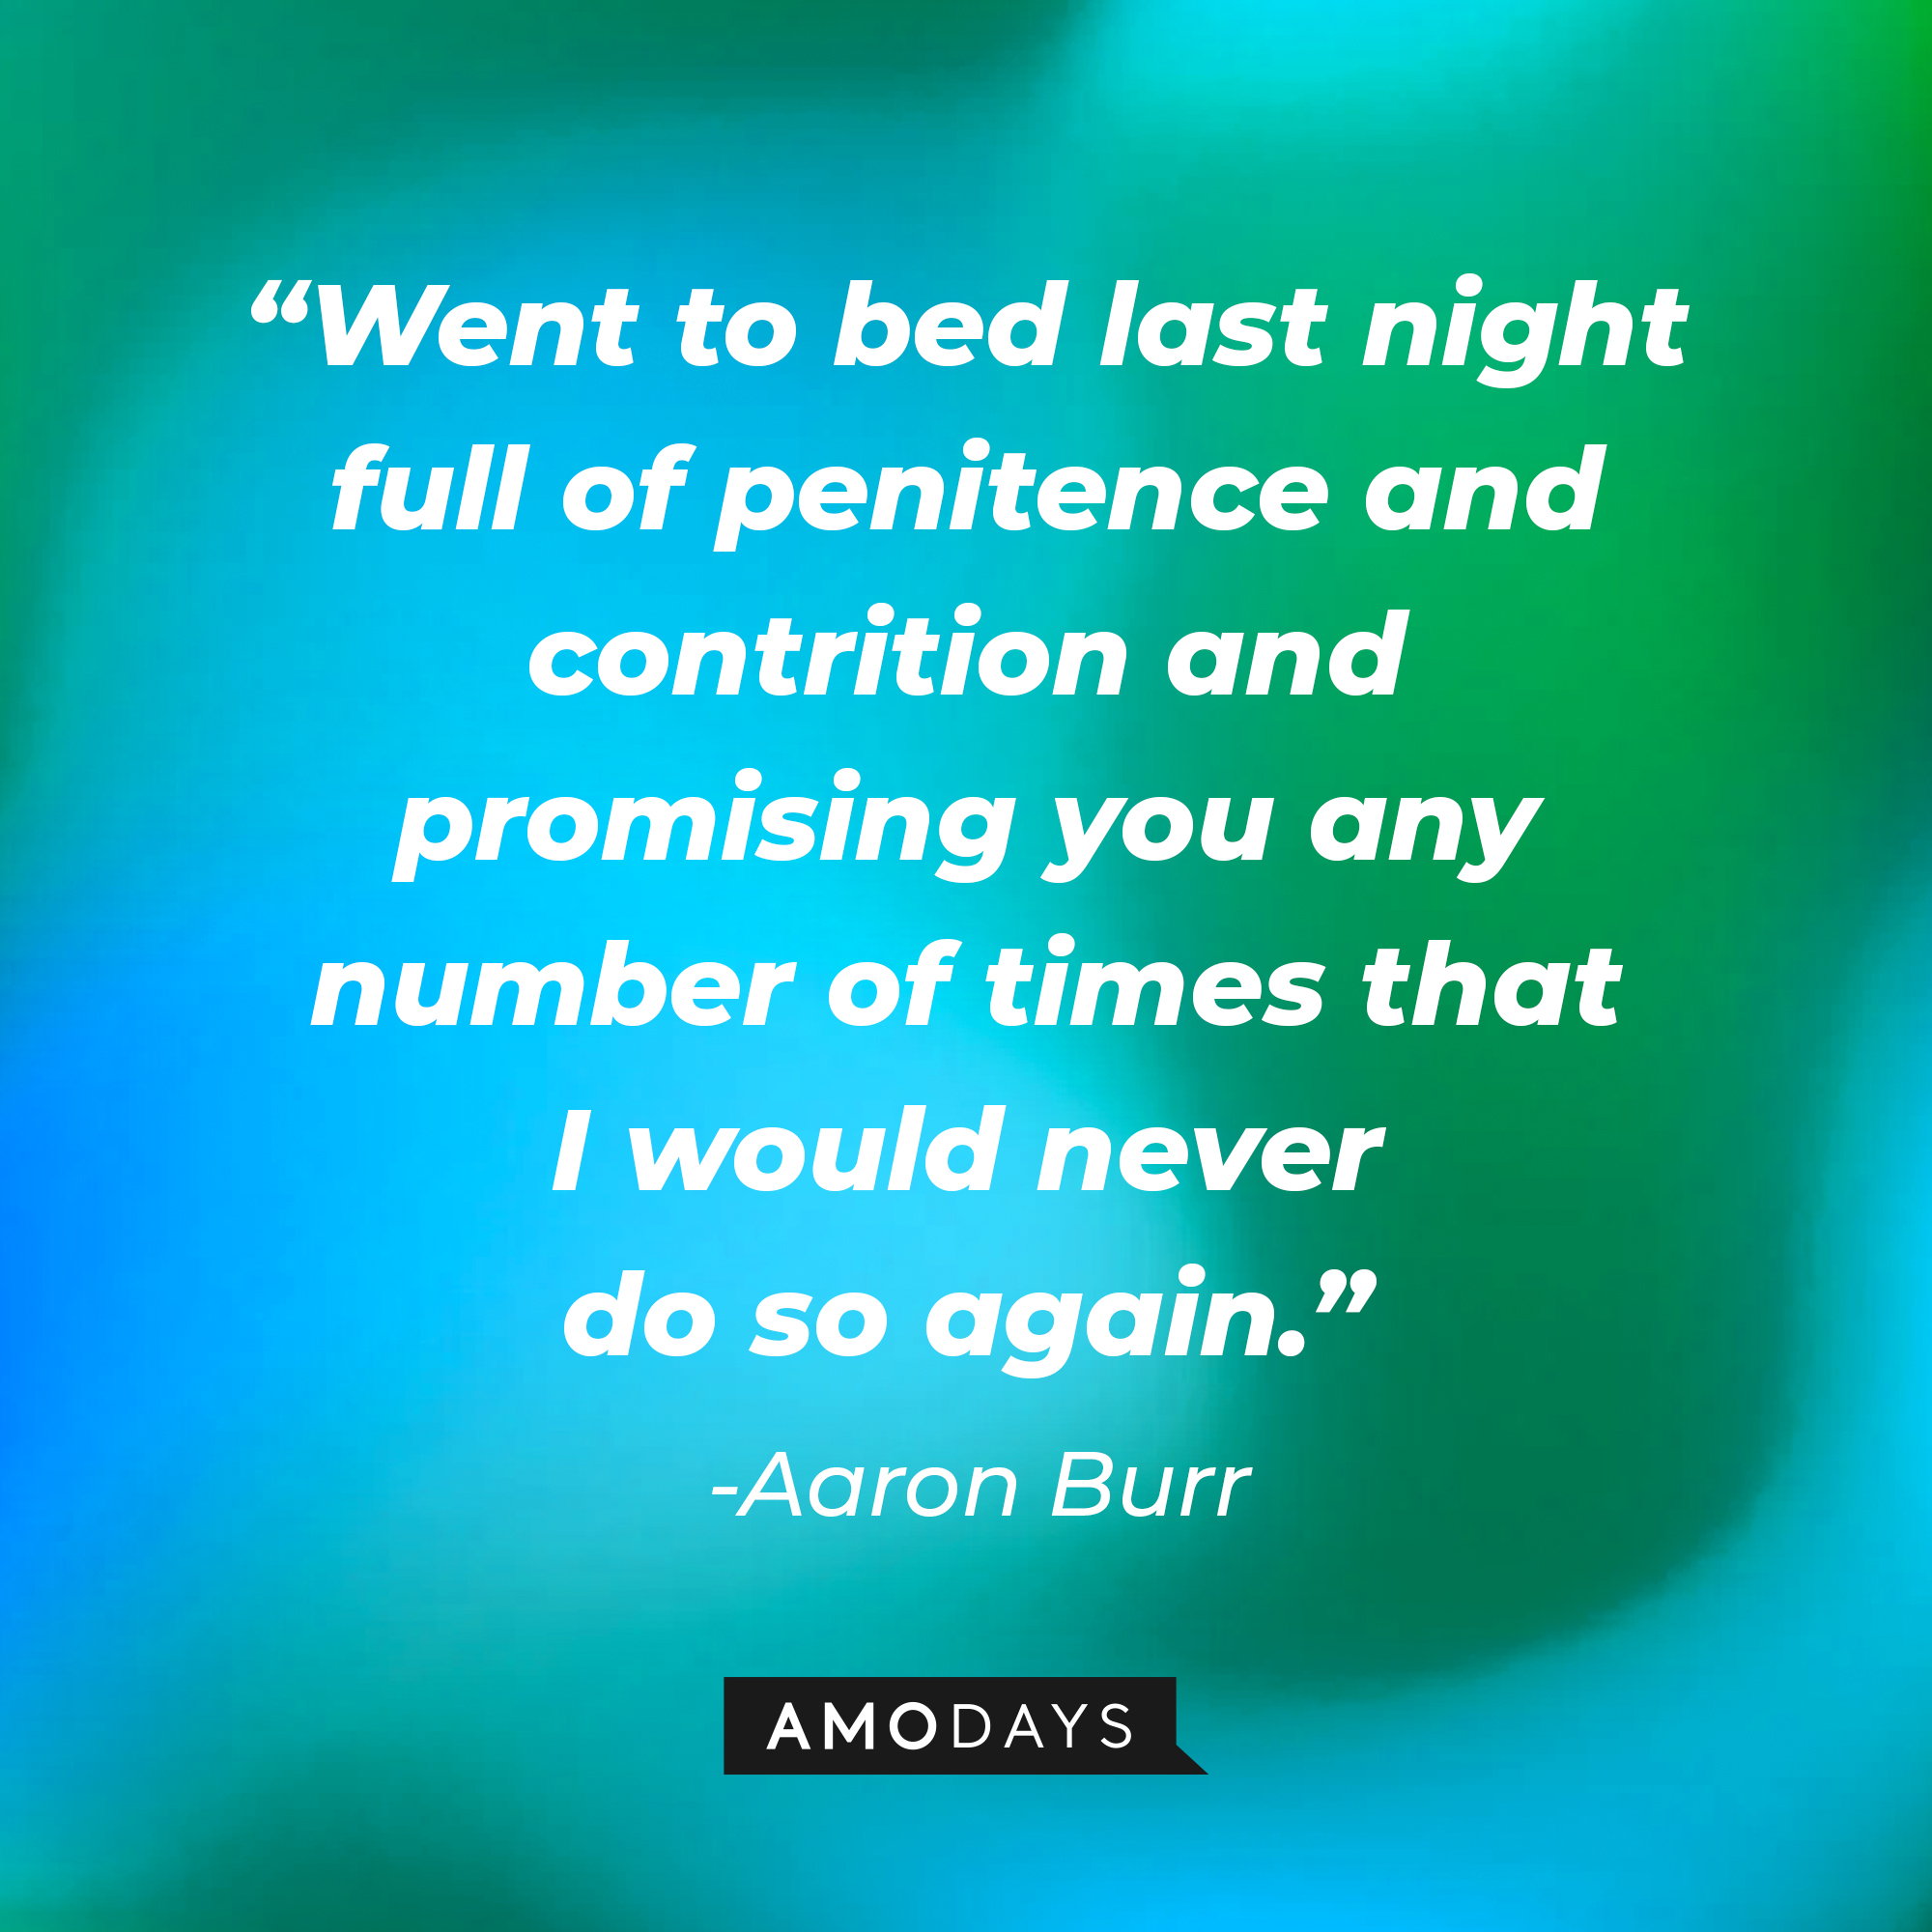 Aaron Burr’s quote: “Went to bed last night full of penitence and contrition and promising you any number of times that I would never do so again.” | Source: AmoDays